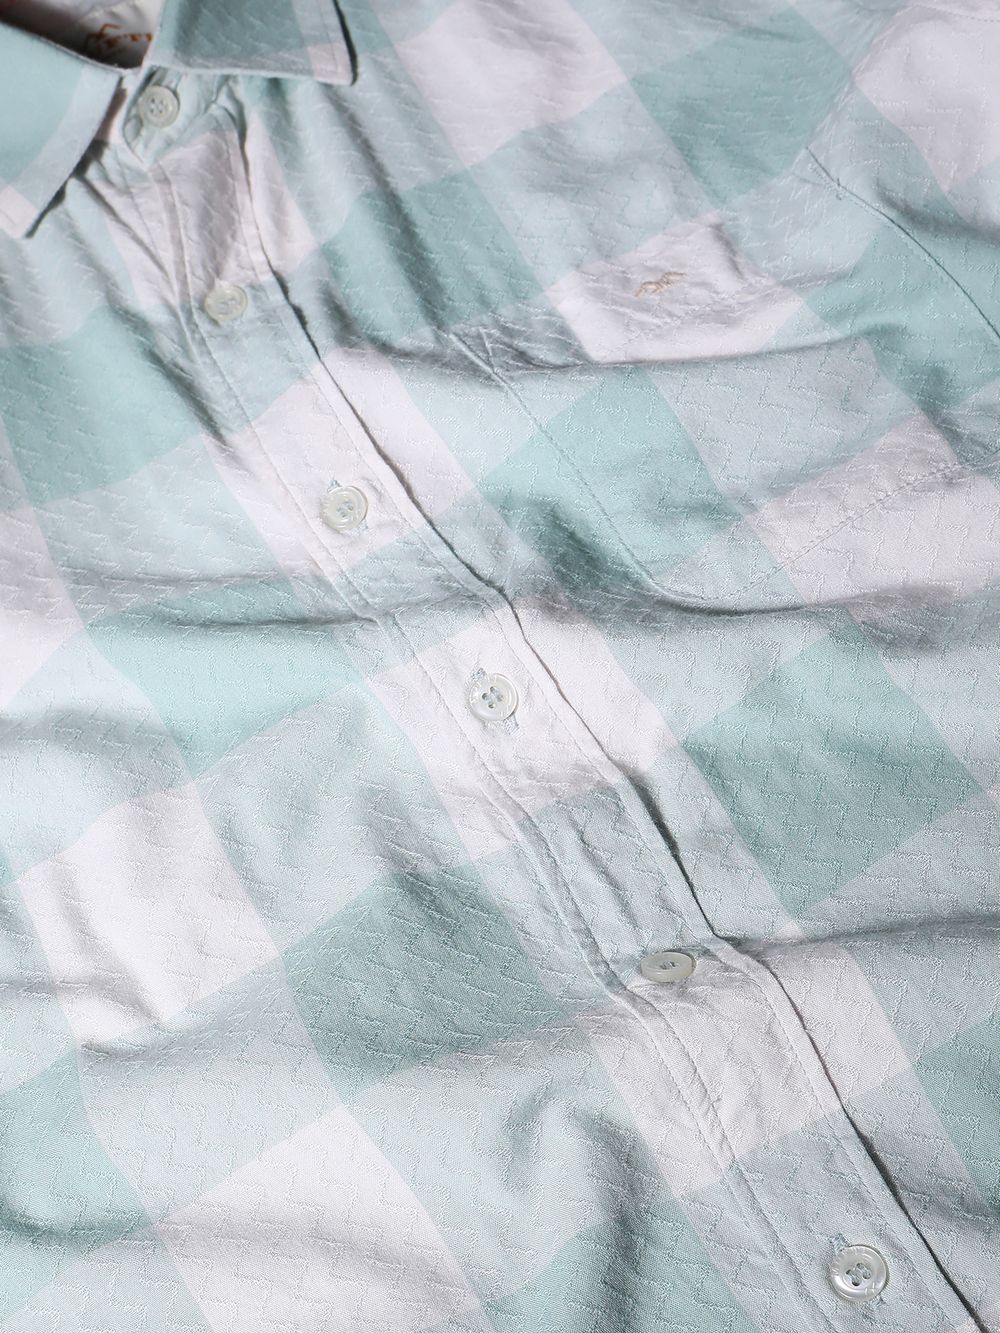 Light Green Textured Check Slim Fit Casual Shirt